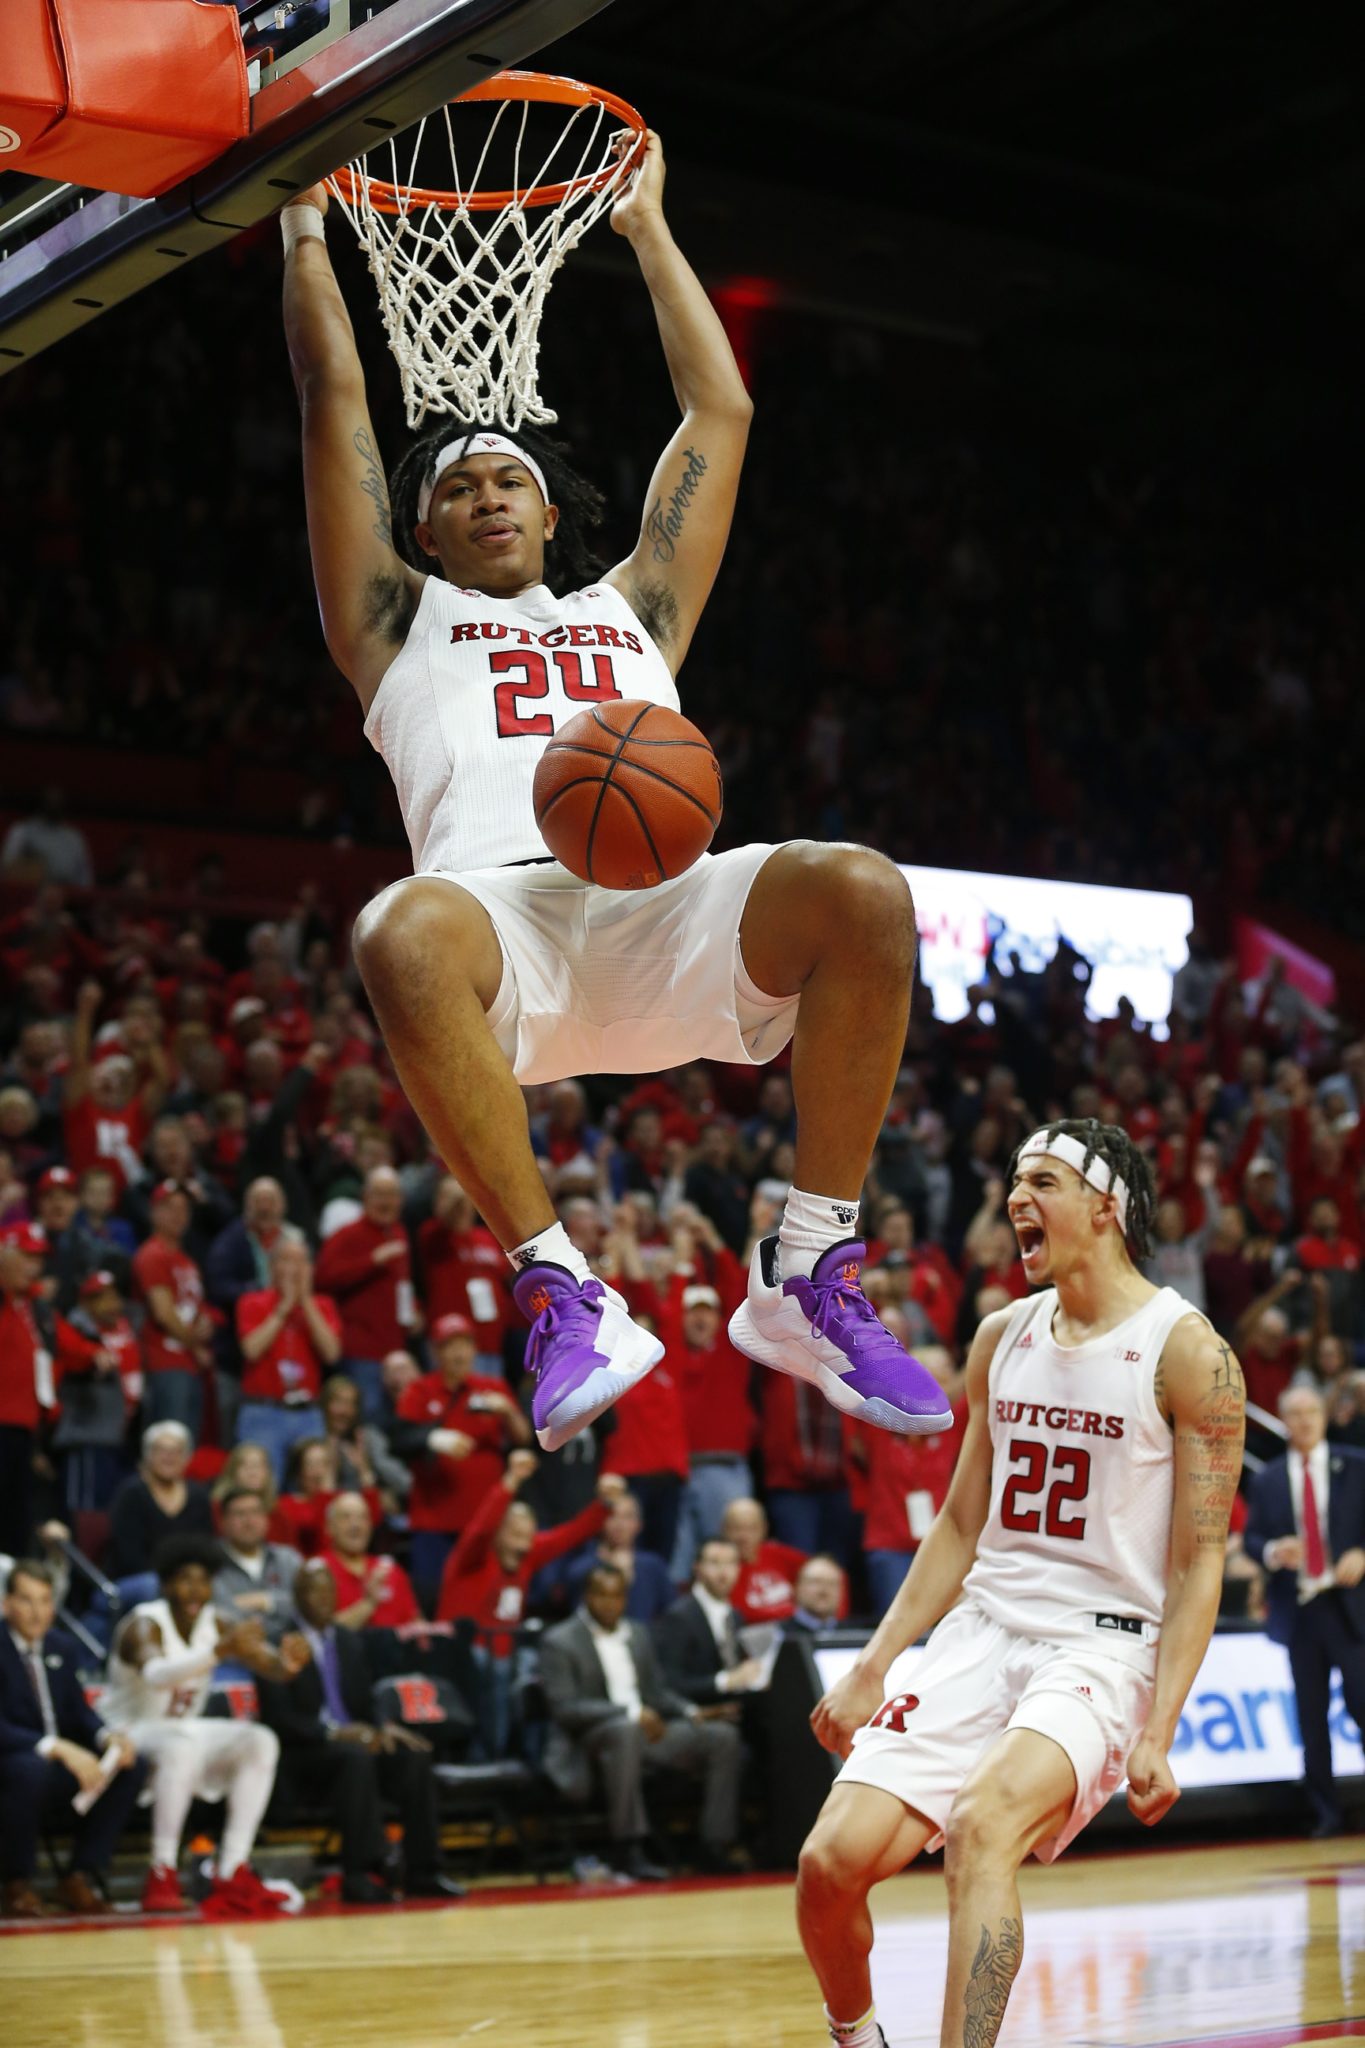 Rutgers Basketball is Ranked for the First Time Since the 1970s